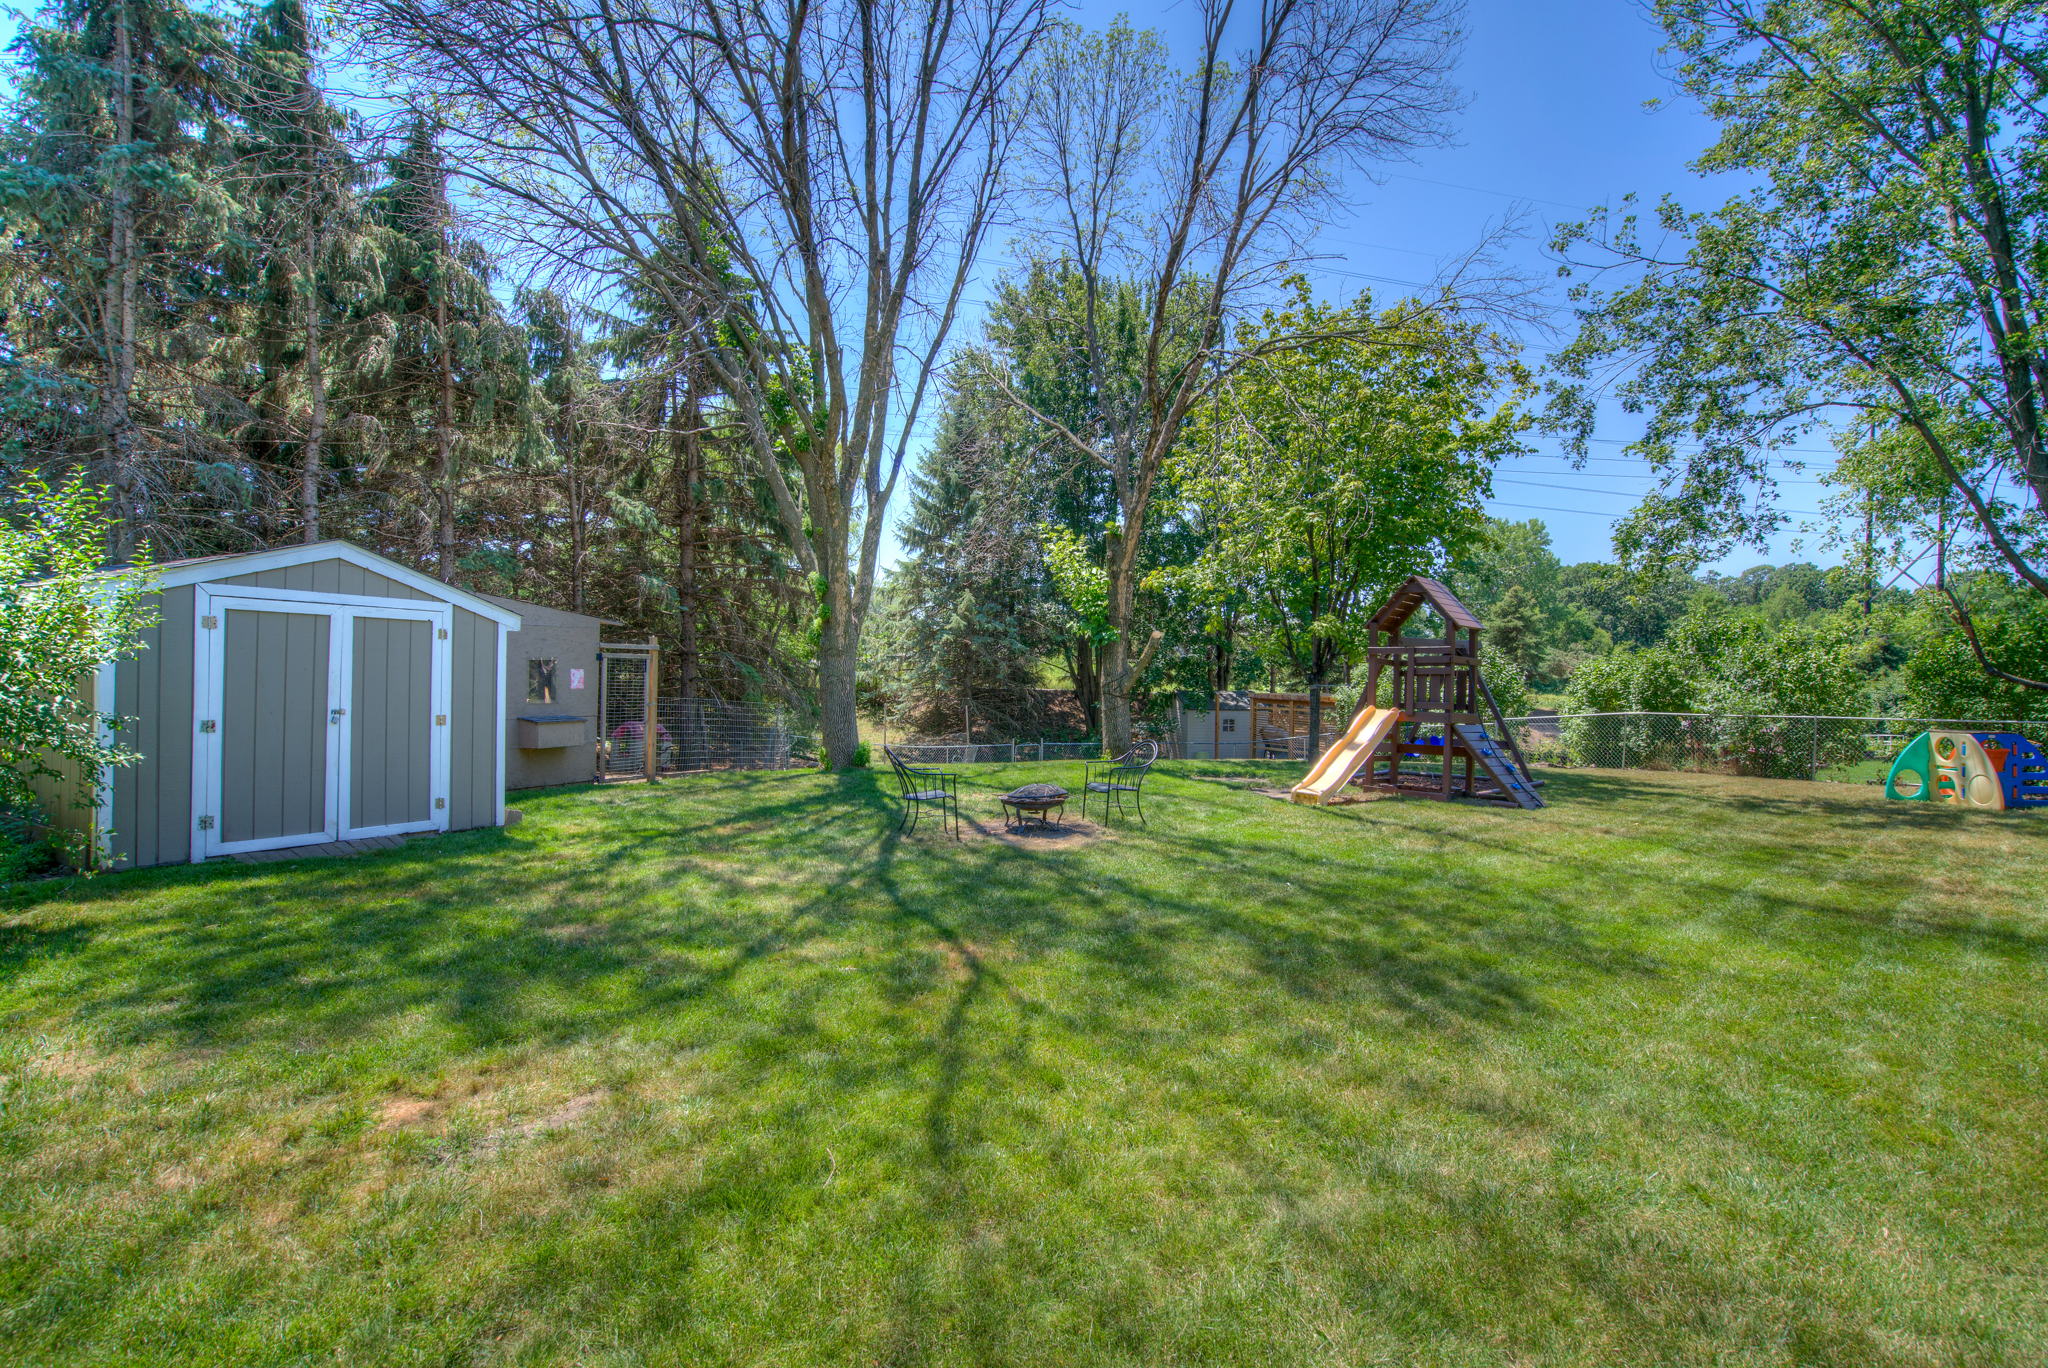 The fenced back yard includes a large storage shed and play set.